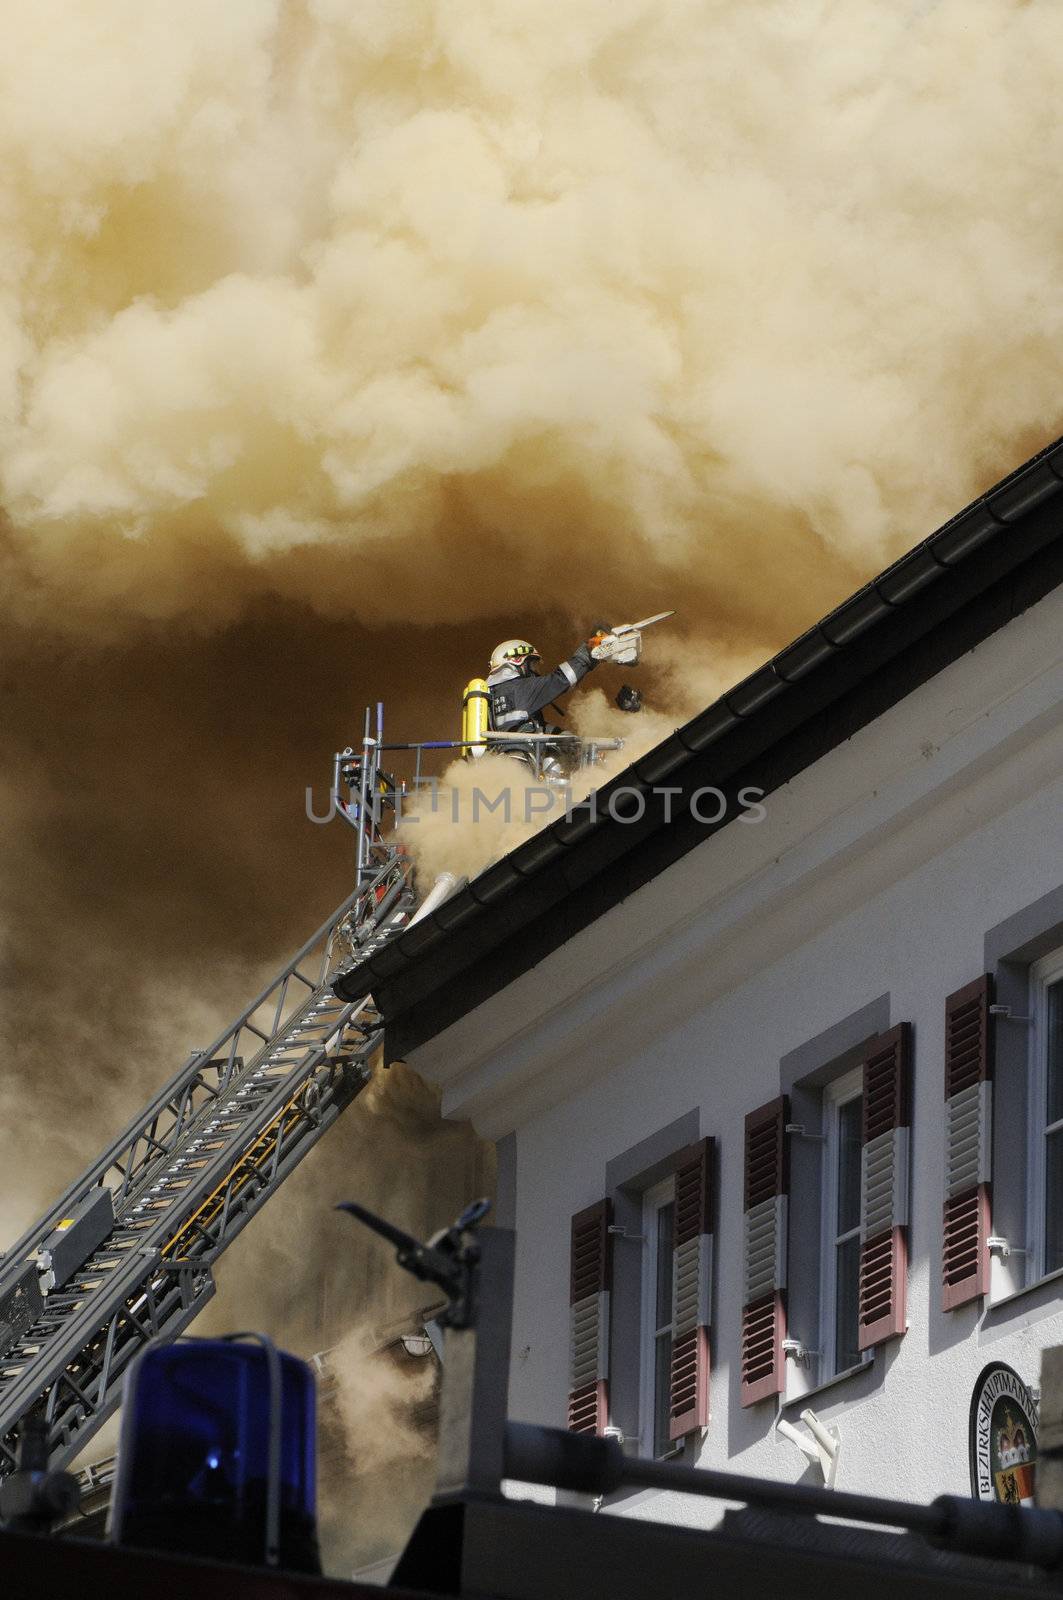 ZELL AM SEE; AUSTRIA - OCT 31: Firefighters attempt to extinguish a big fire in the centre of Zell am See on October 31, 2011 in Zell am See.